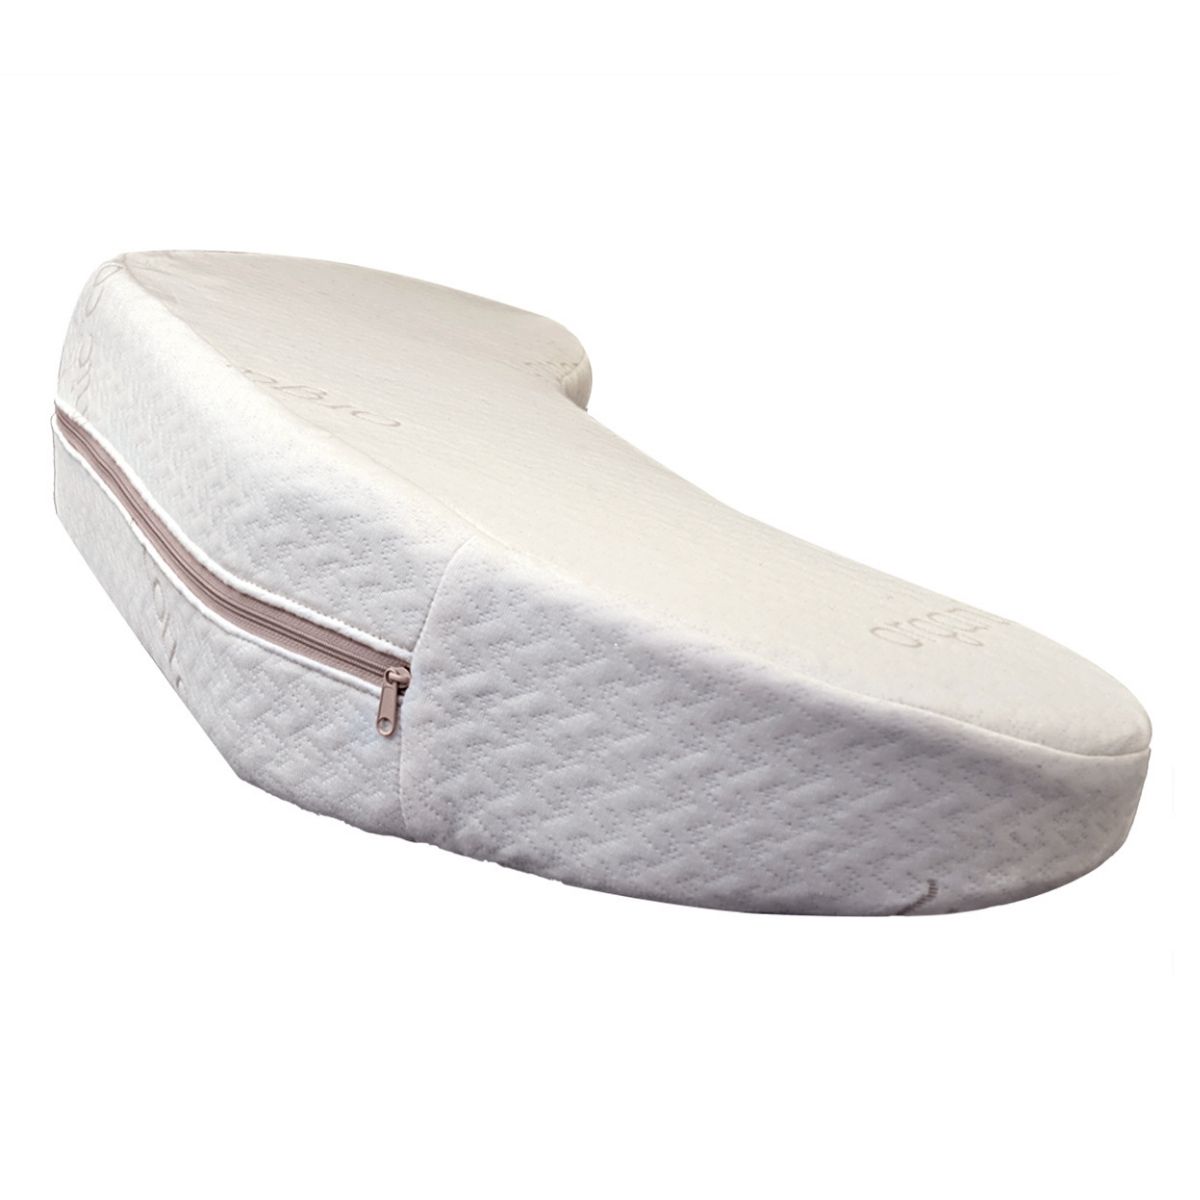 Bedsore Rescue Positioning Wedge Foam Pillow Support + Contoured